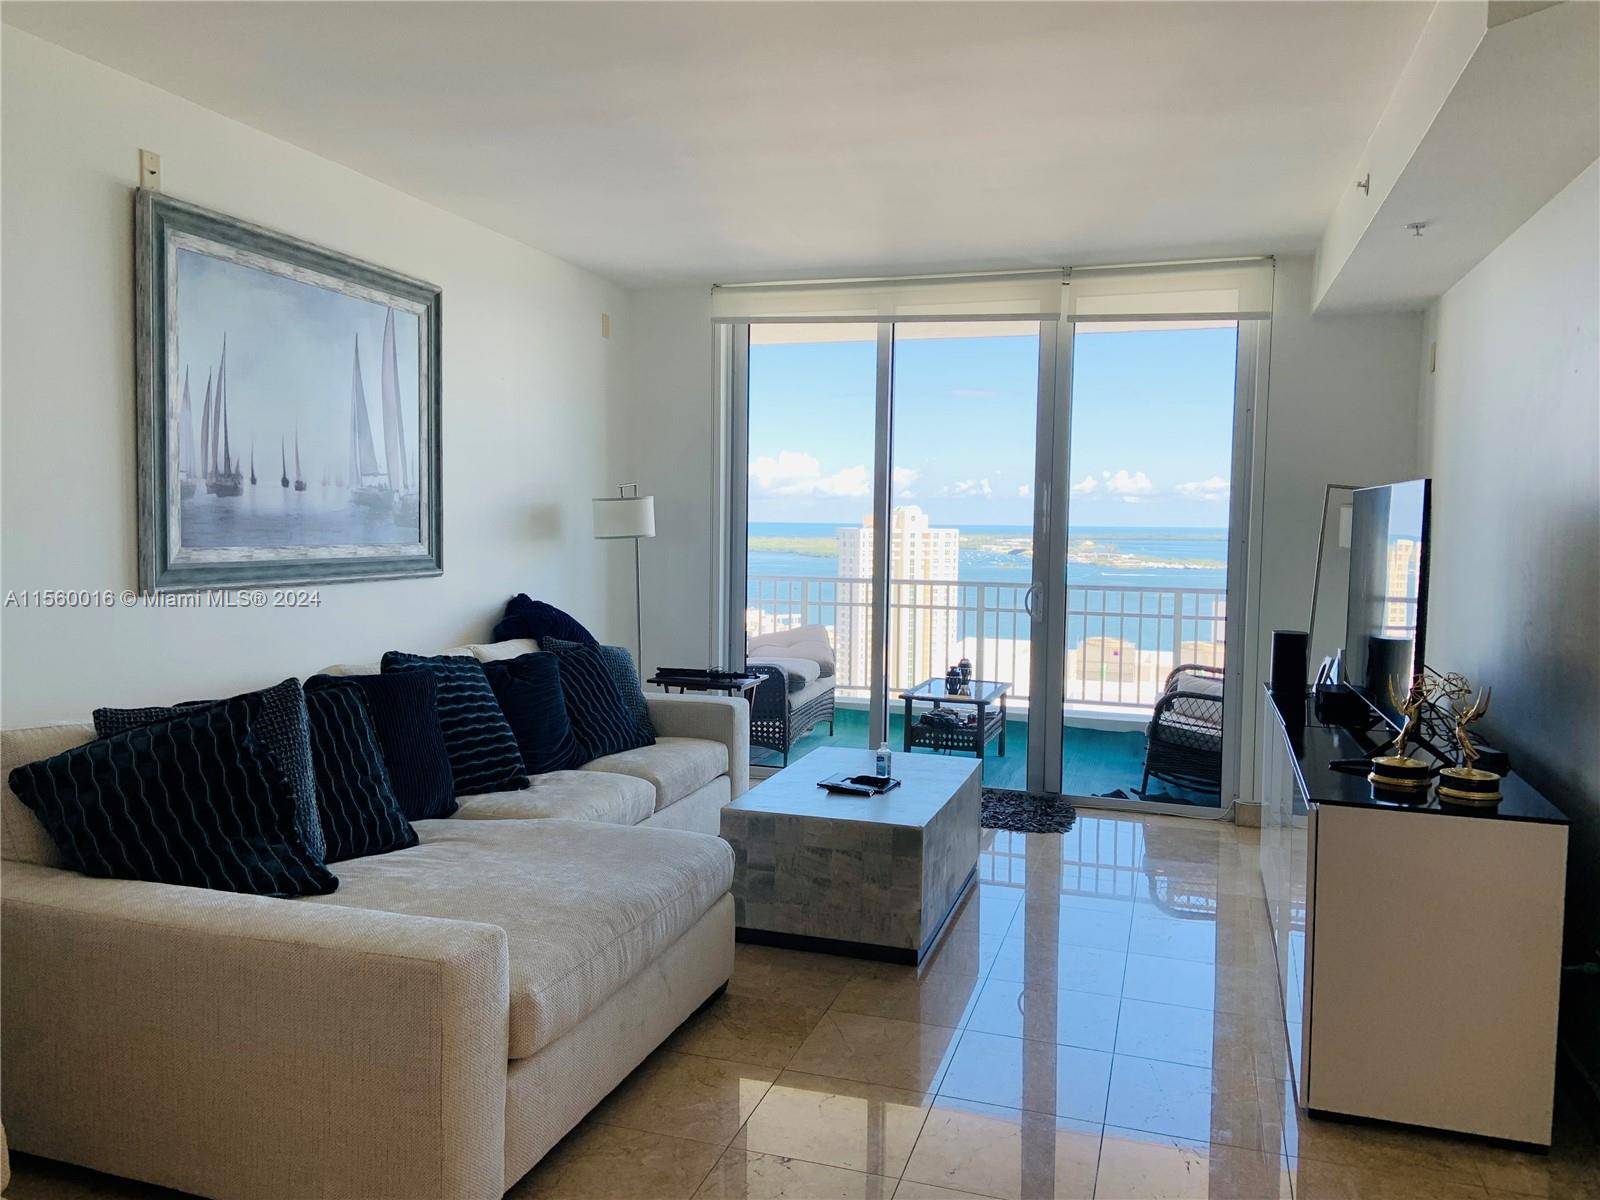 Unobstructed views of bay and skyline from this high floor residence in prestigious Brickell Key Island.